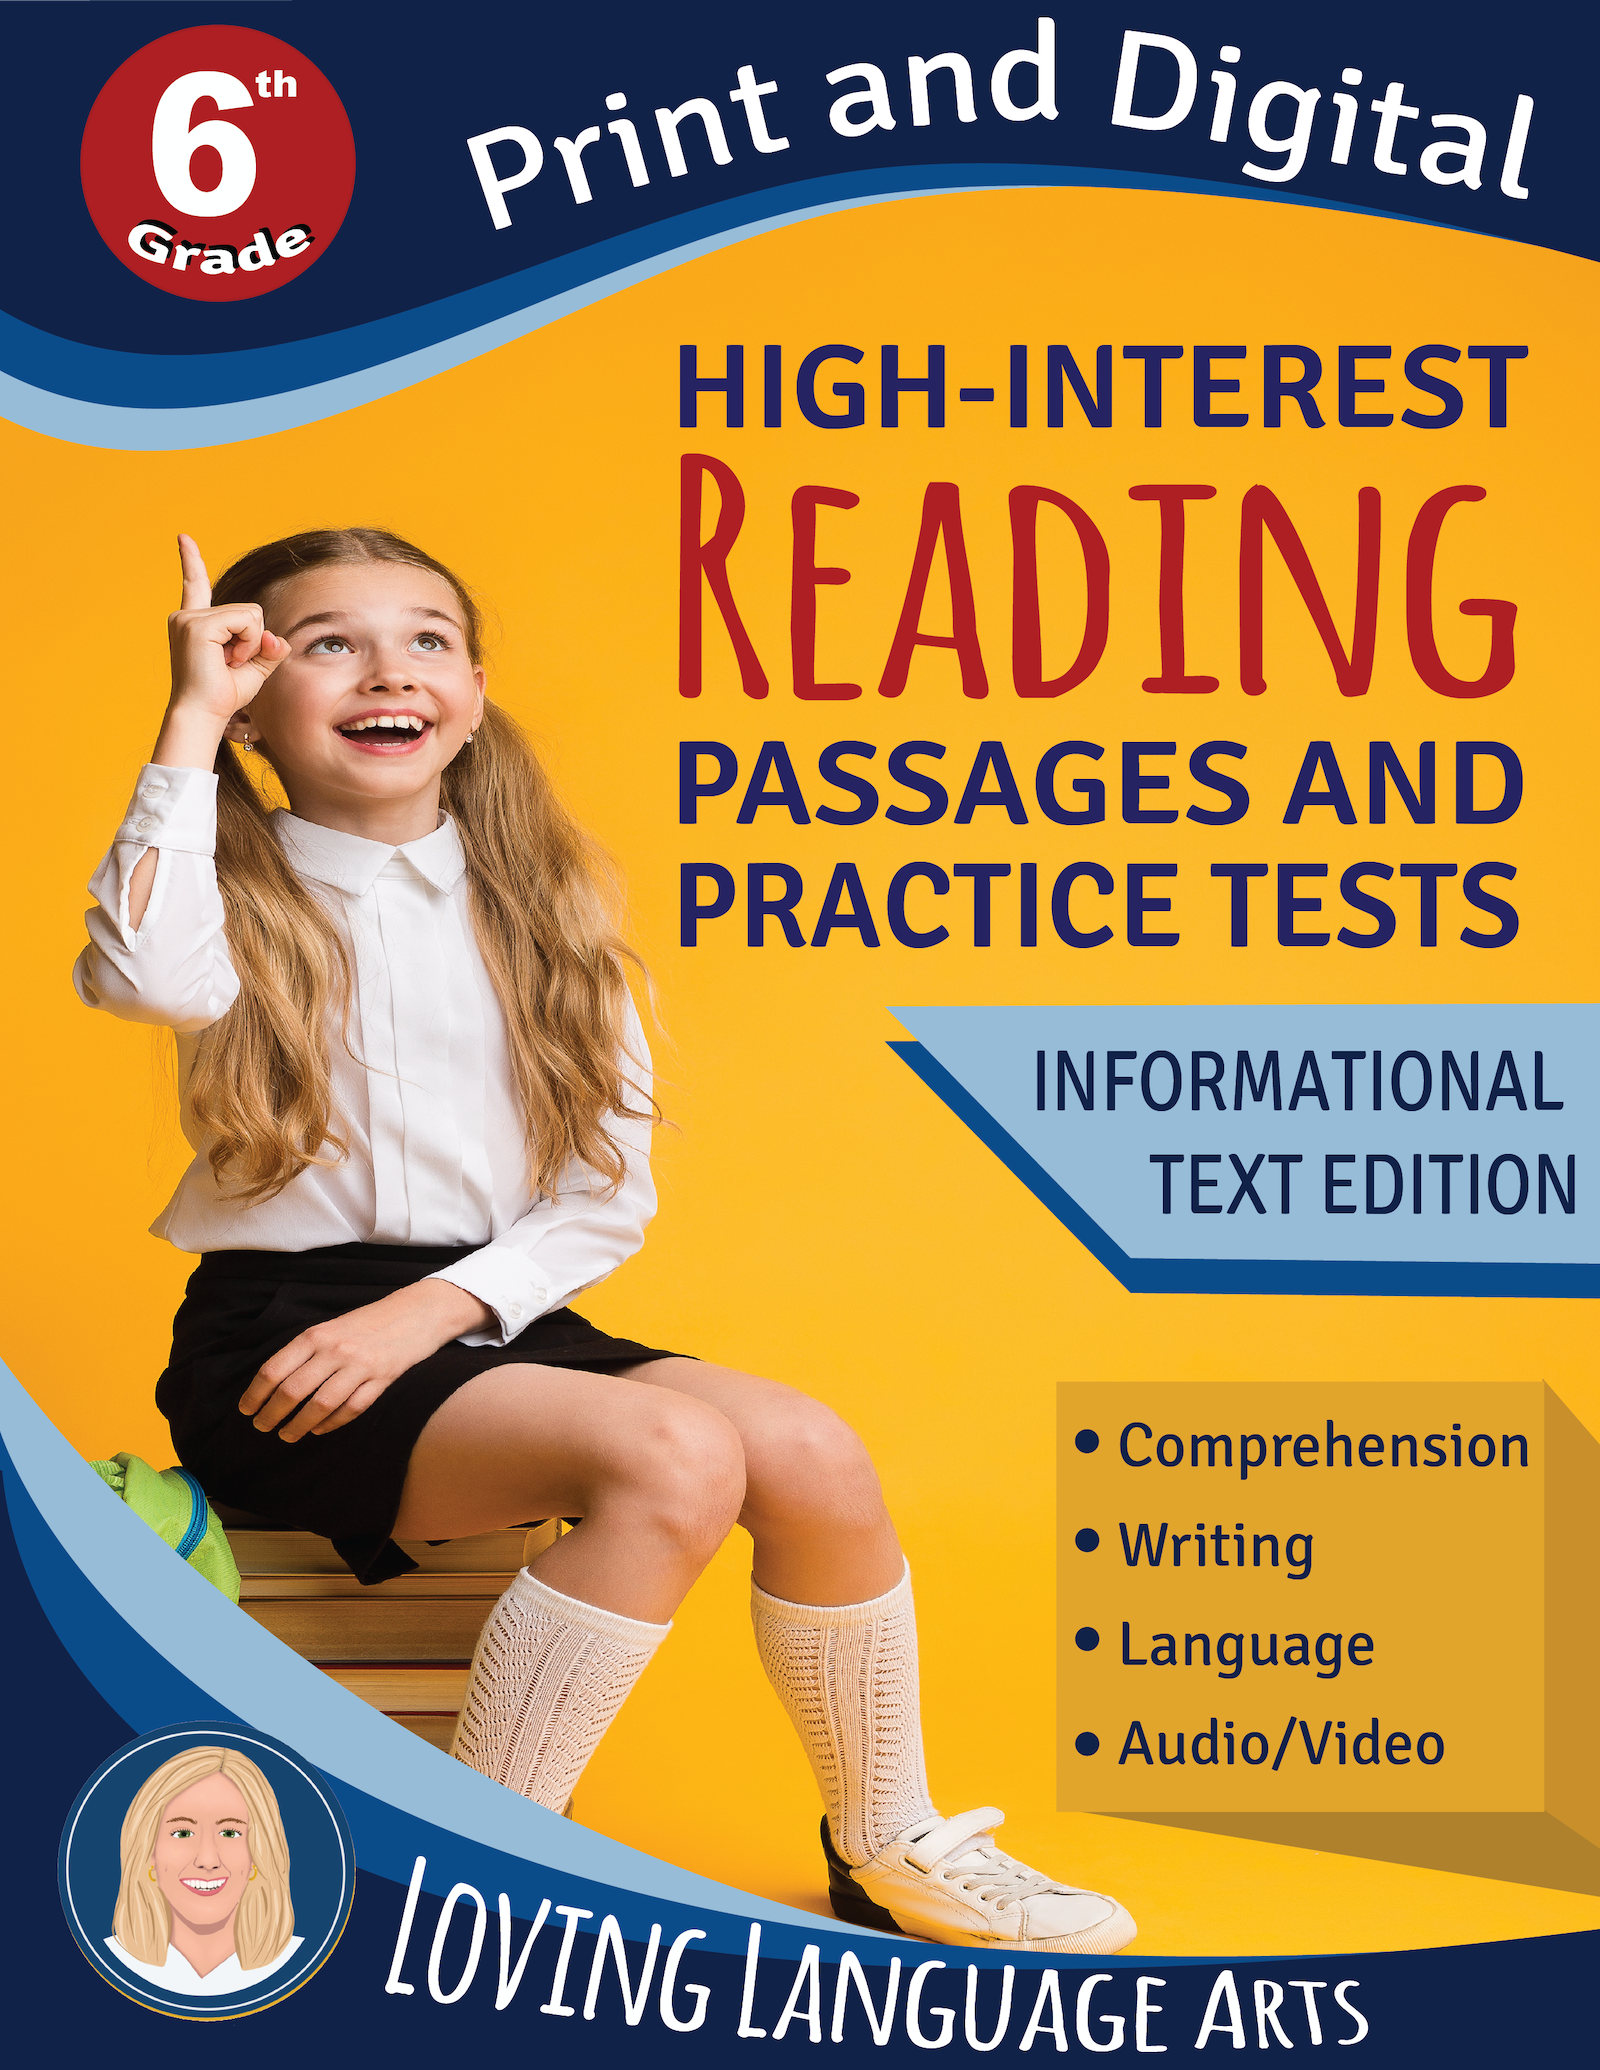 6th grade language arts workbook - High-interest passages and practice tests.